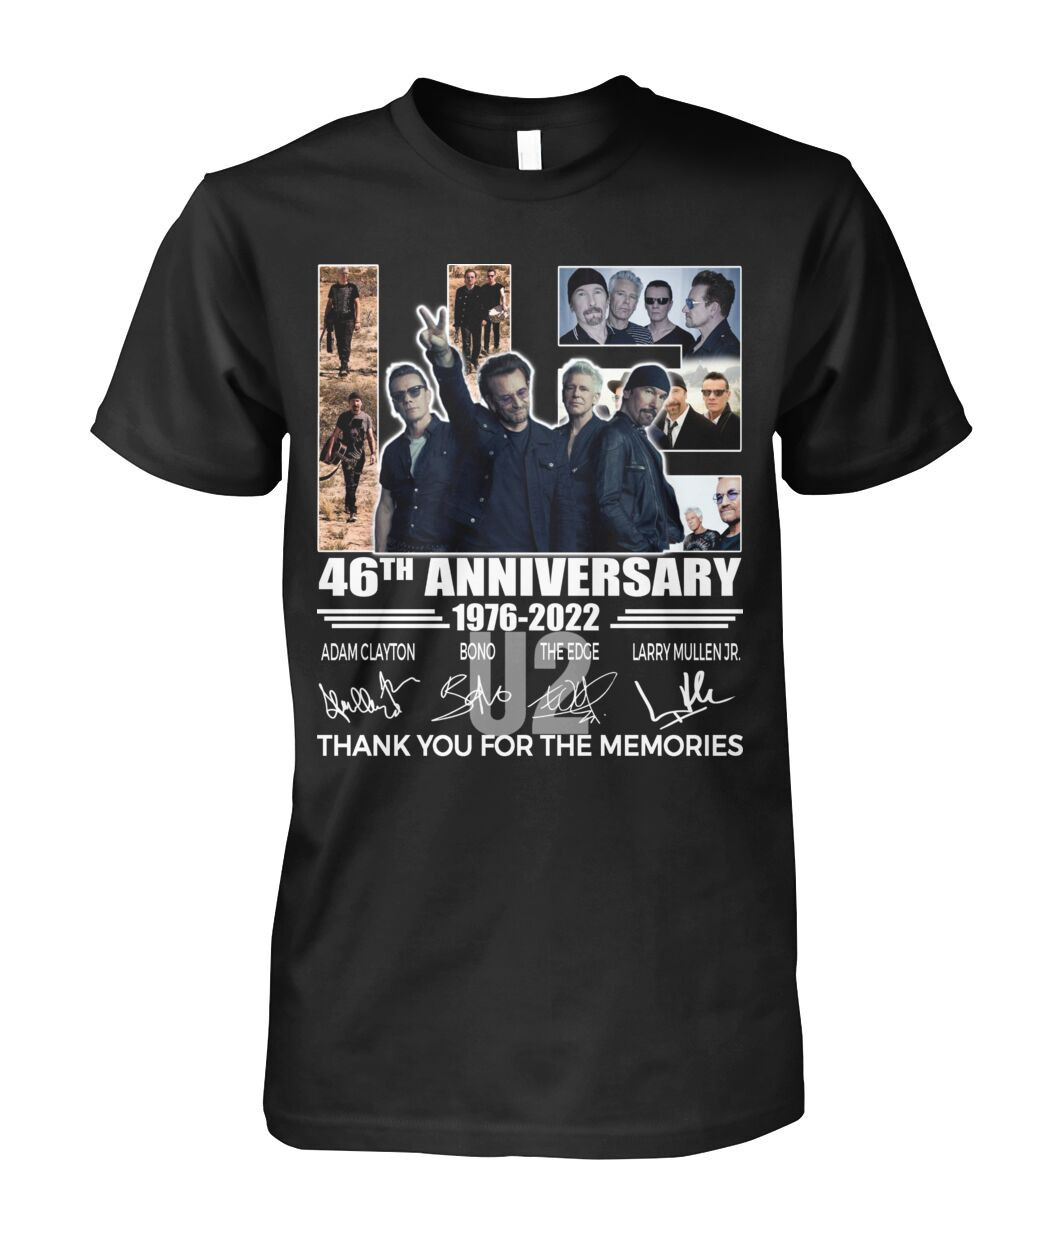 There are many different 3d shirts available - Check it out 214